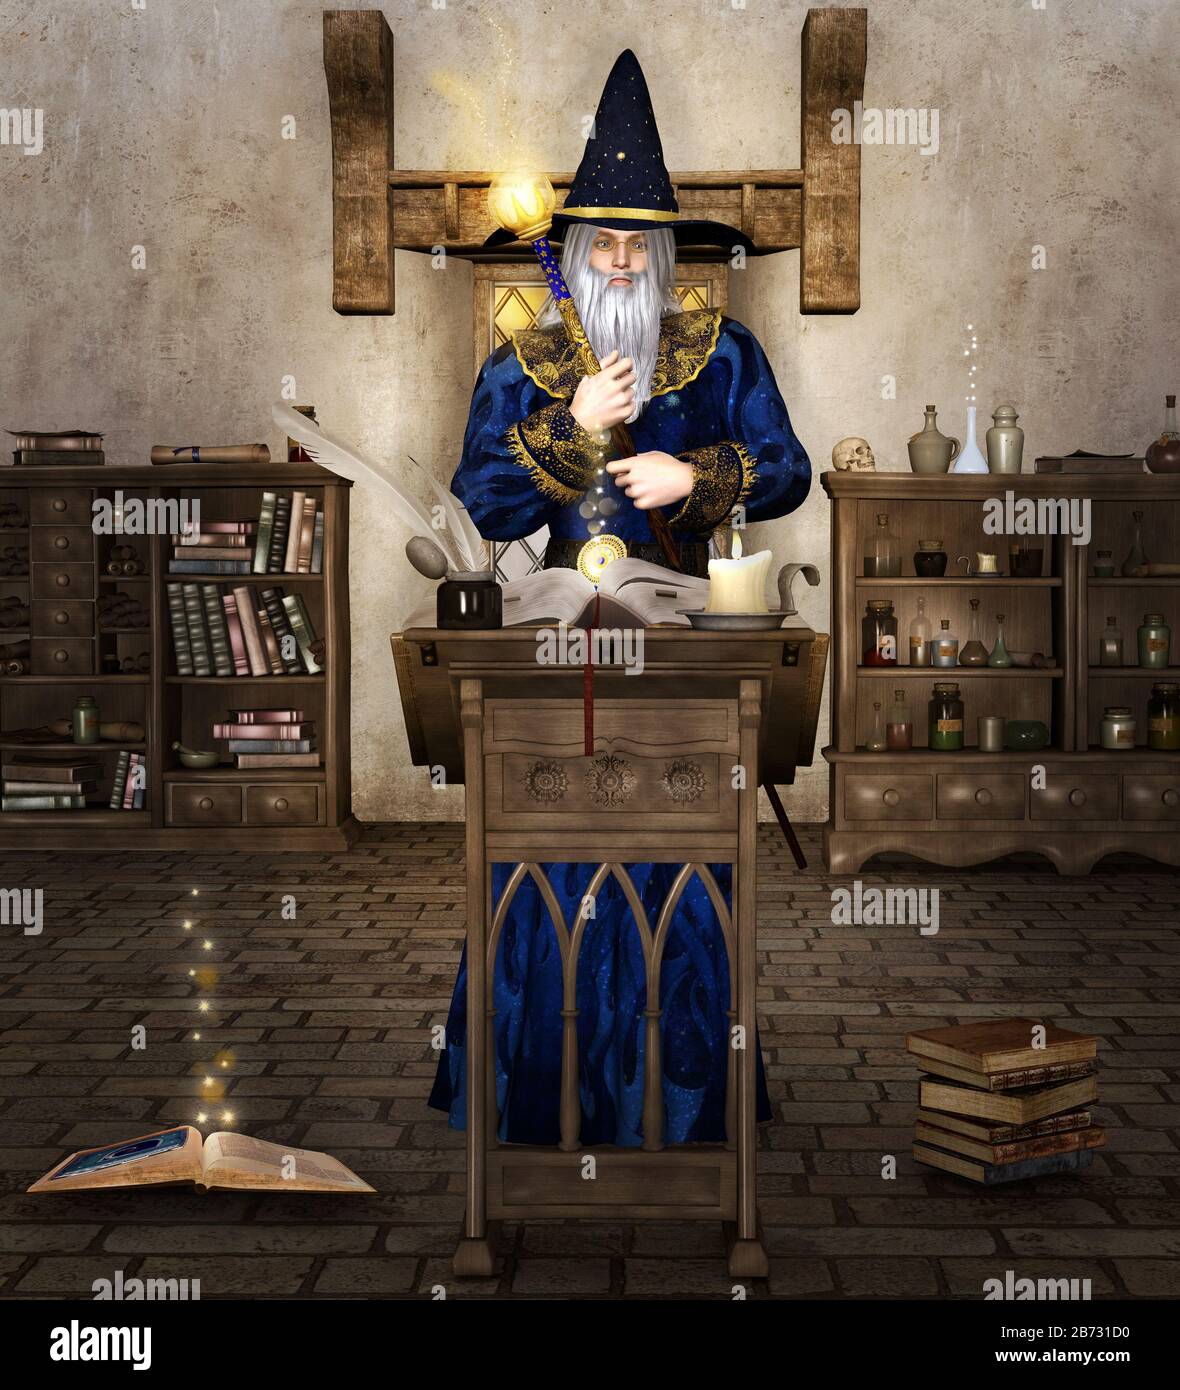 Old wizard at work with his magic wand inside an alchemy chamber Stock Photo